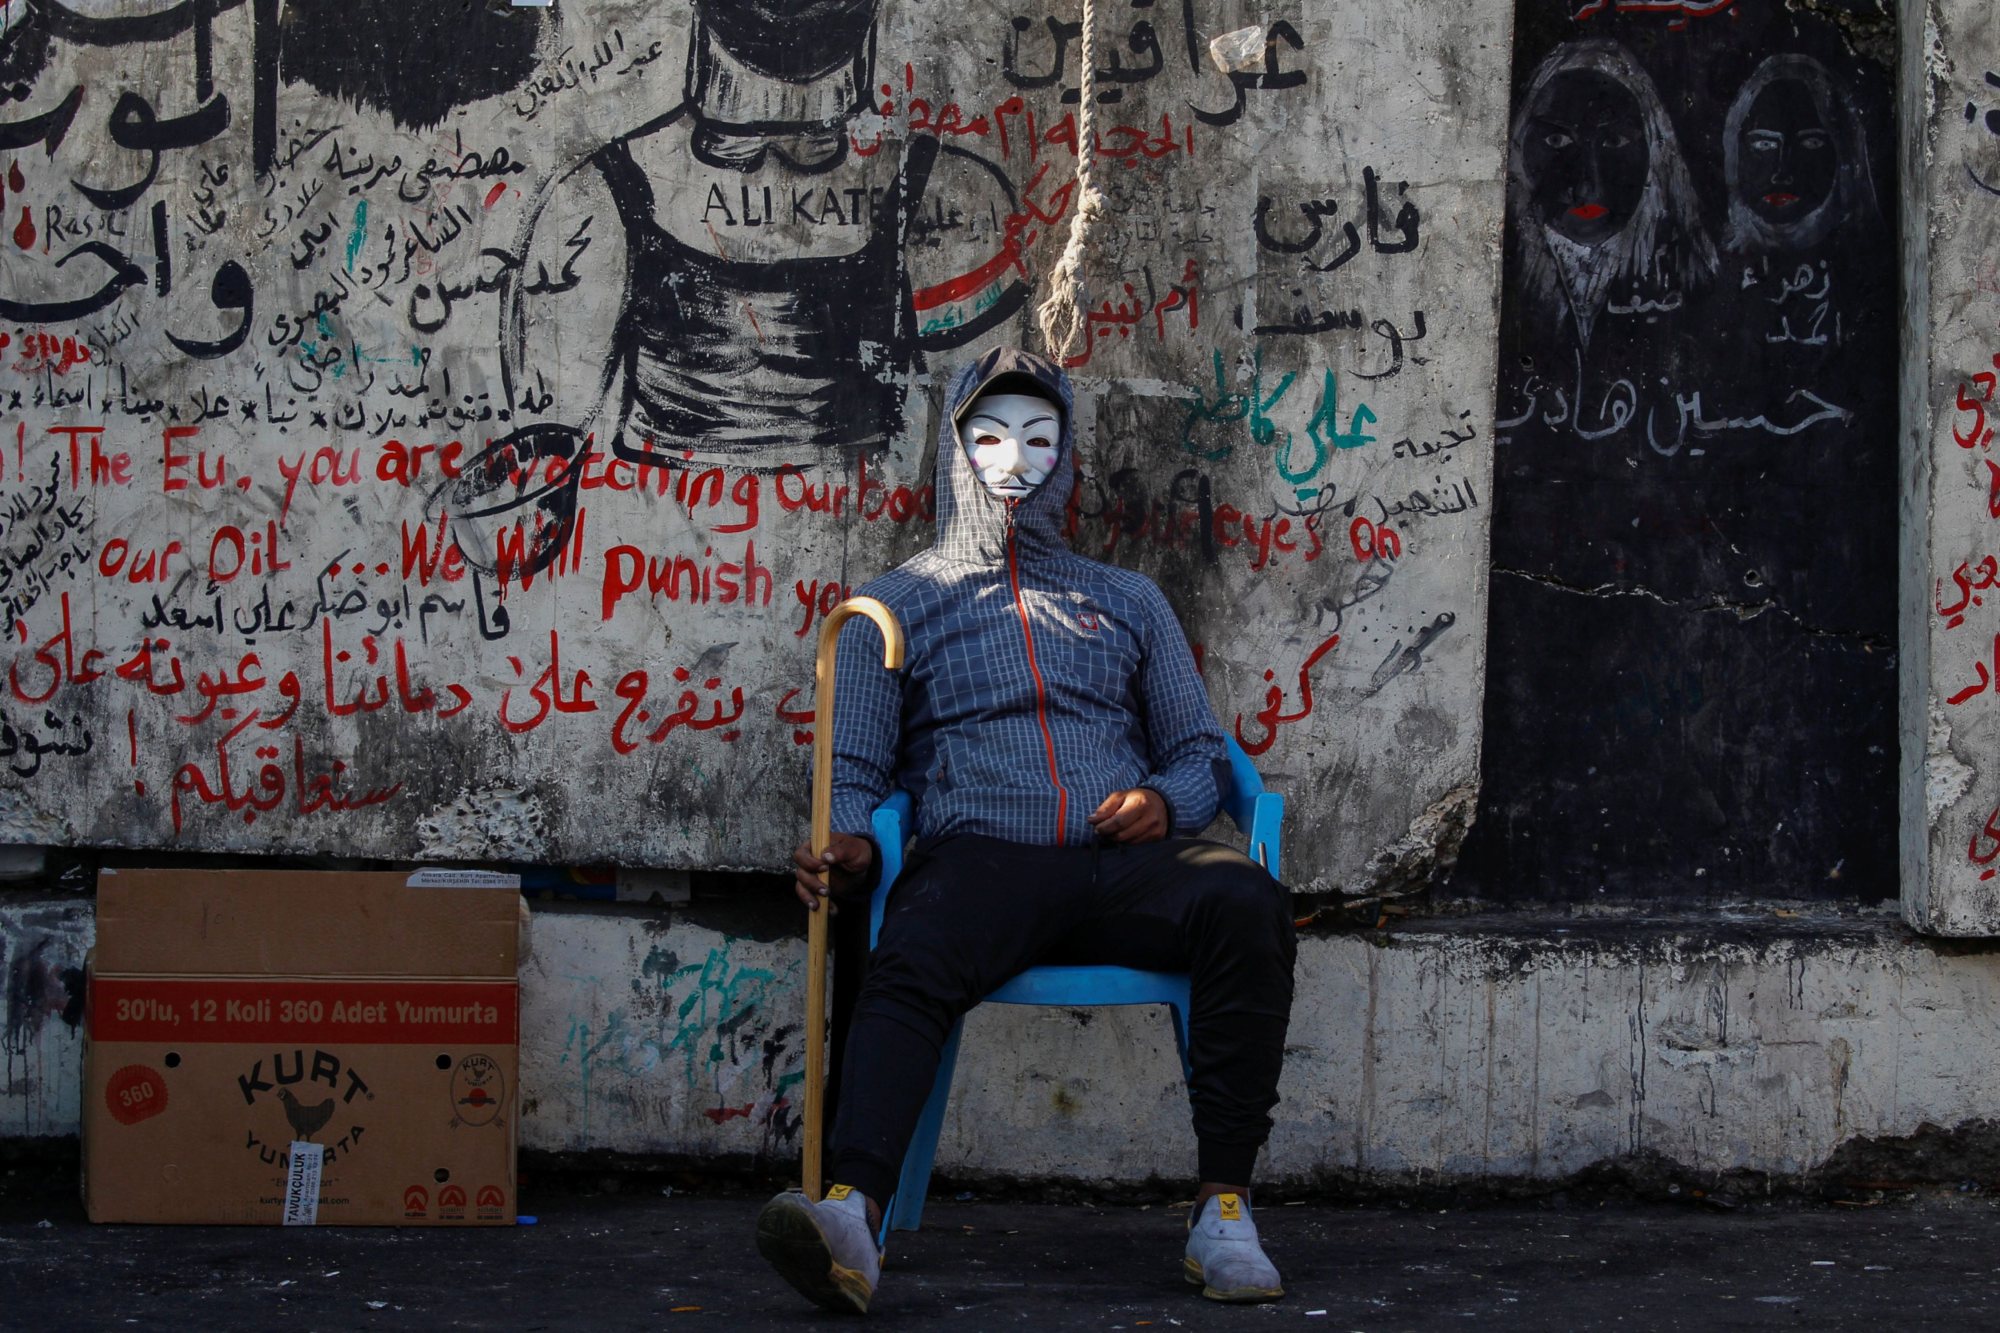 An Iraqi demonstrator sits wearing a mask during the ongoing anti-government protests in Baghdad, Iraq on 22 November 2019 (Reuters)